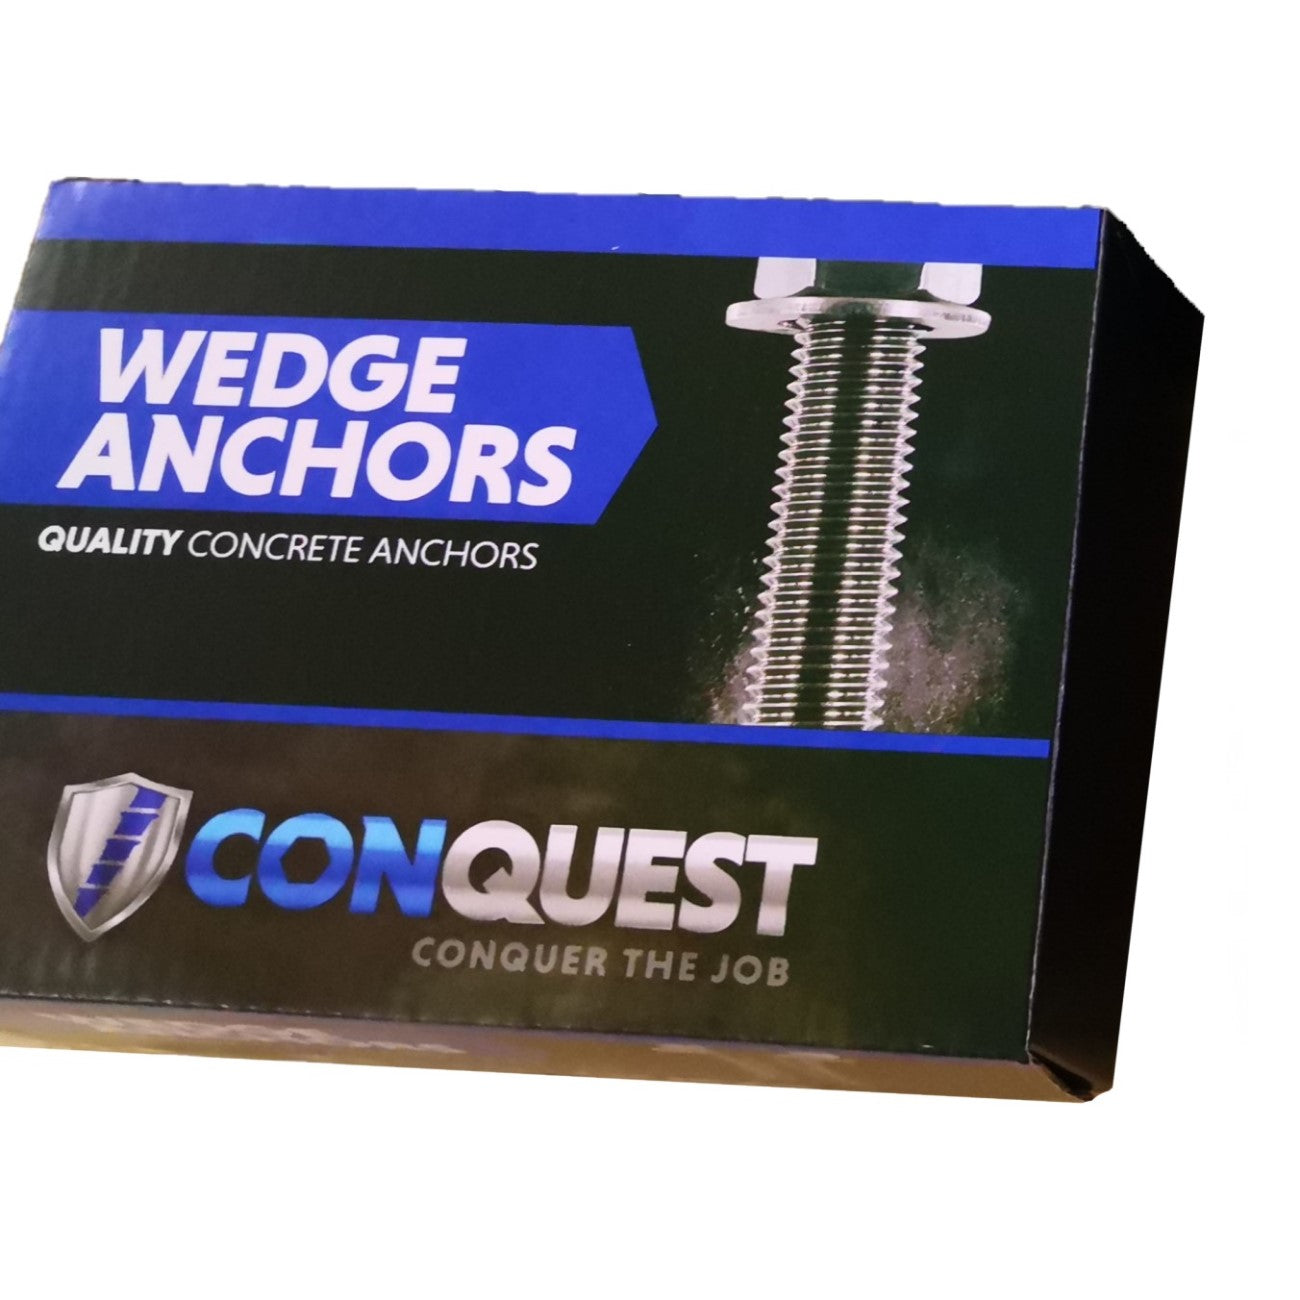 5/8" x 7" Conquest Wedge Anchors - 316 Stainless Steel, Pkg 25